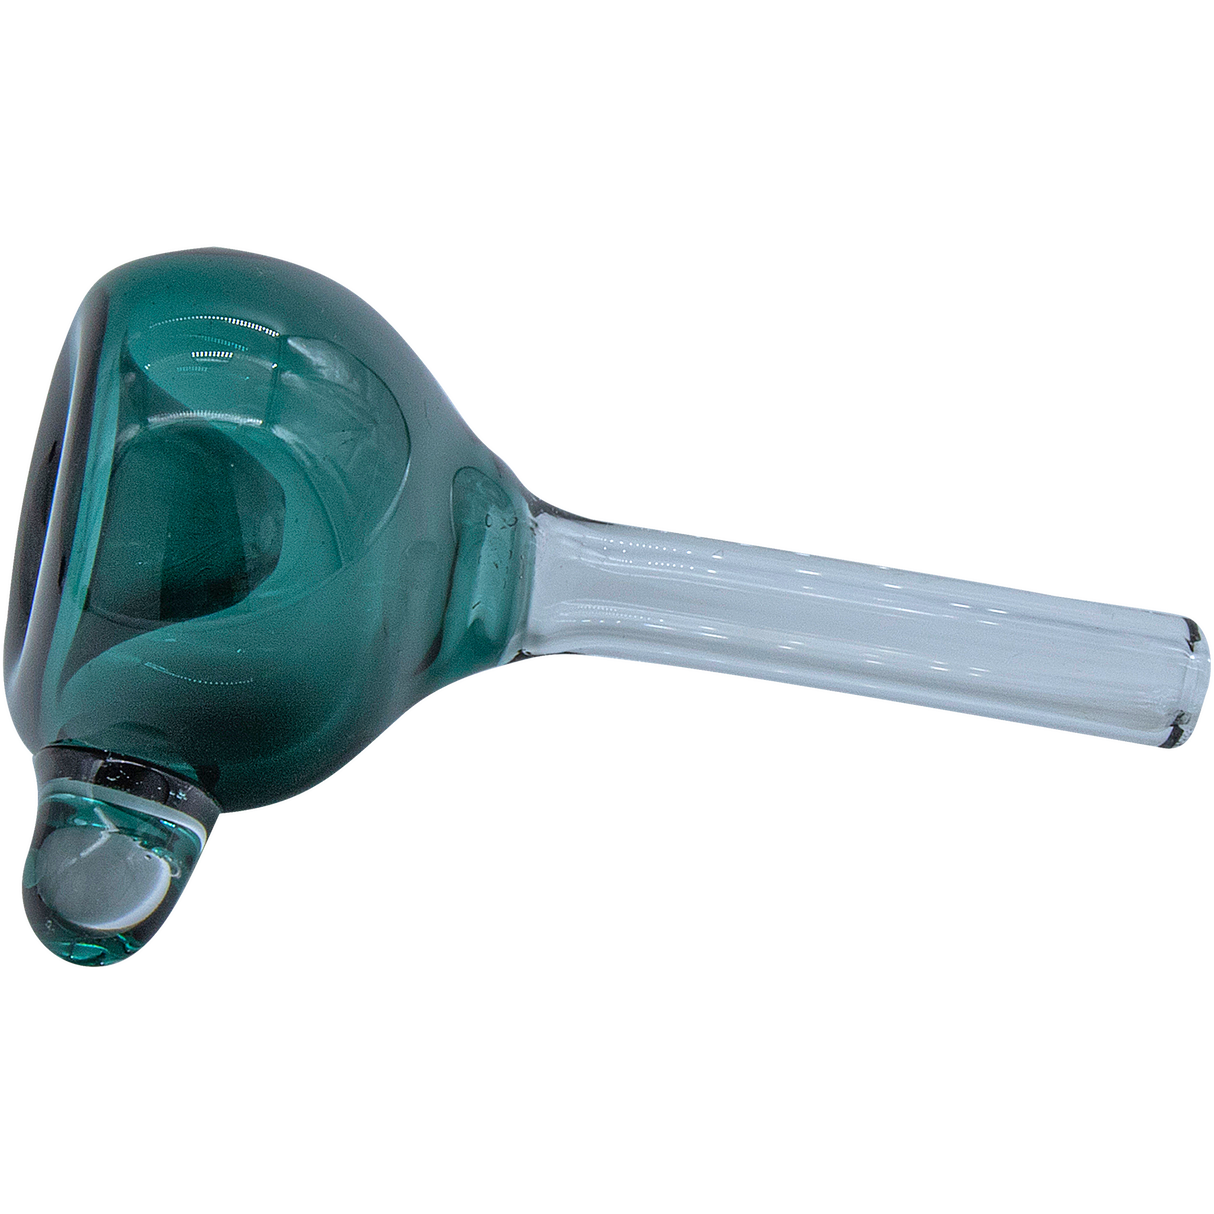 LA Pipes Bubble Bowl Pull-Stem Slide in Assorted Colors with Grommet Joint